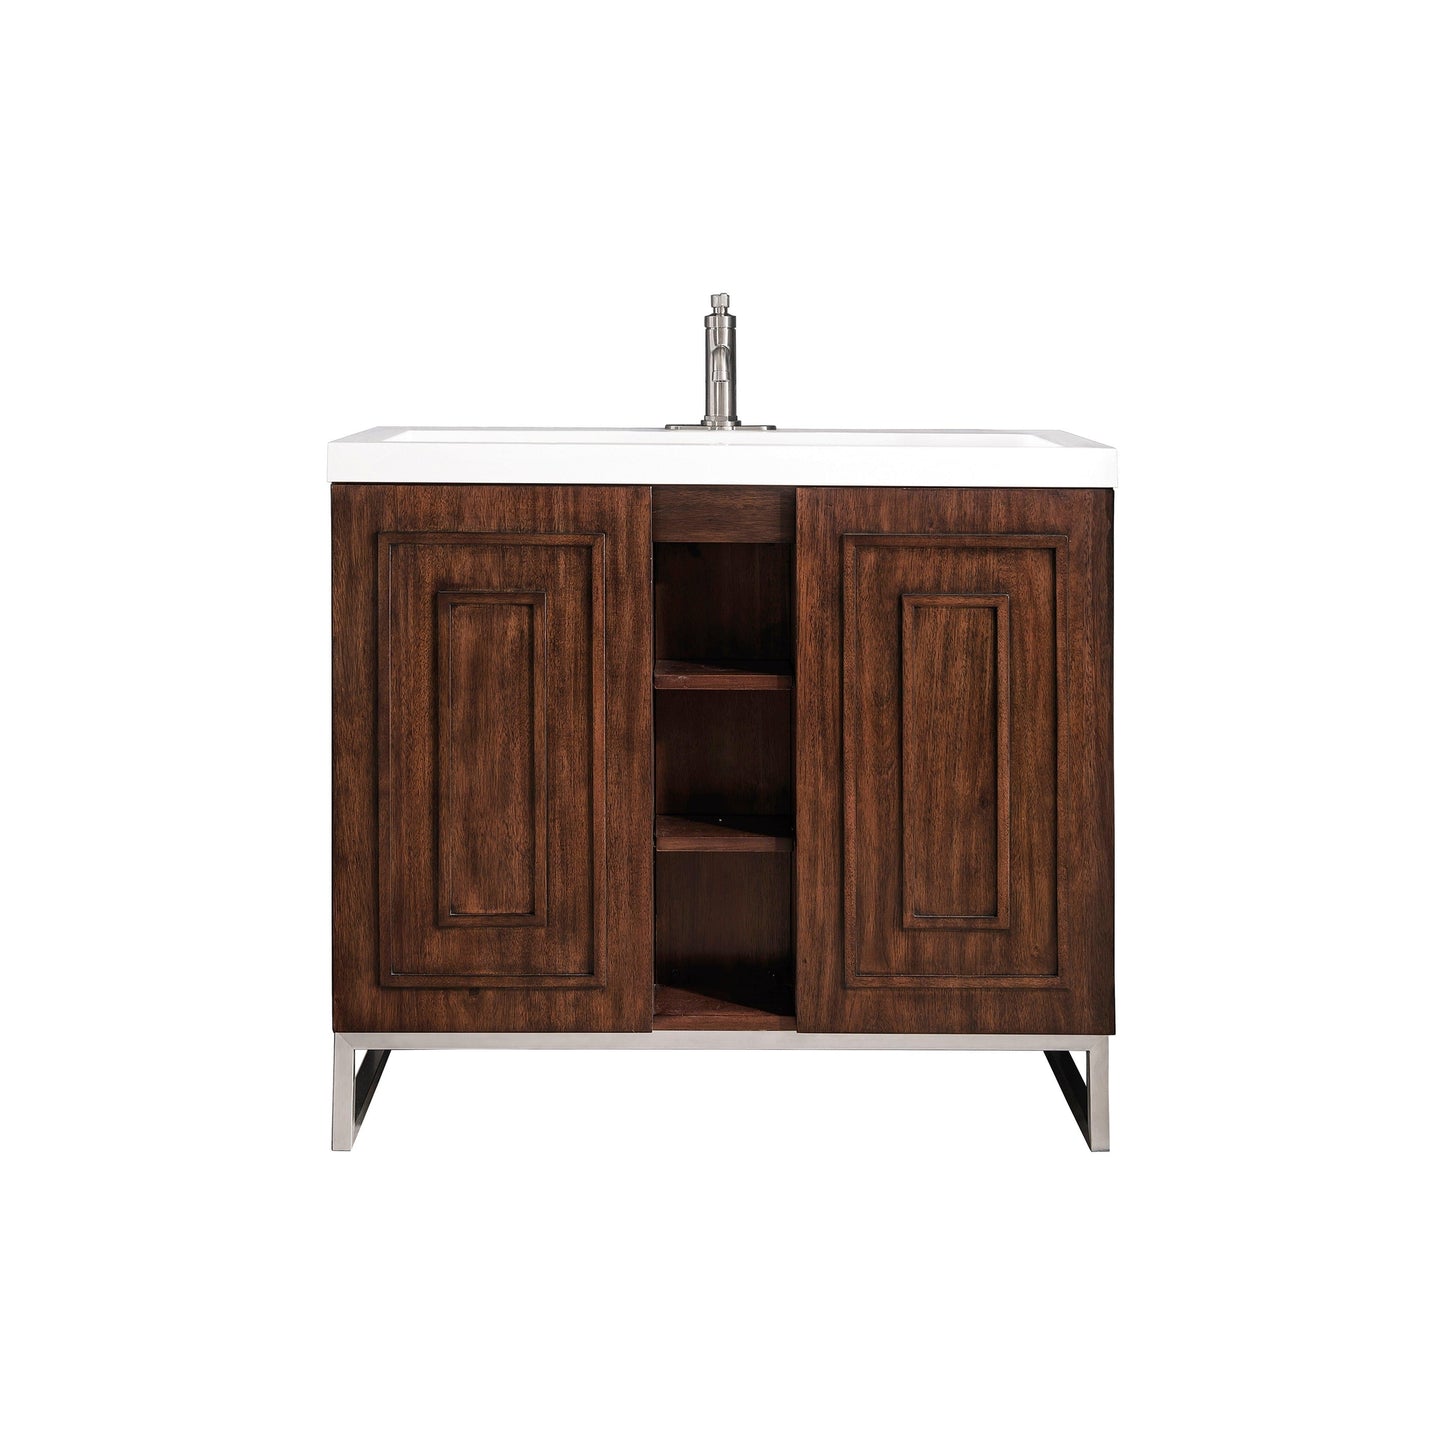 James Martin Vanities Alicante 39.5" Mid Century Acacia, Brushed Nickel Single Vanity Cabinet With White Glossy Composite Countertop